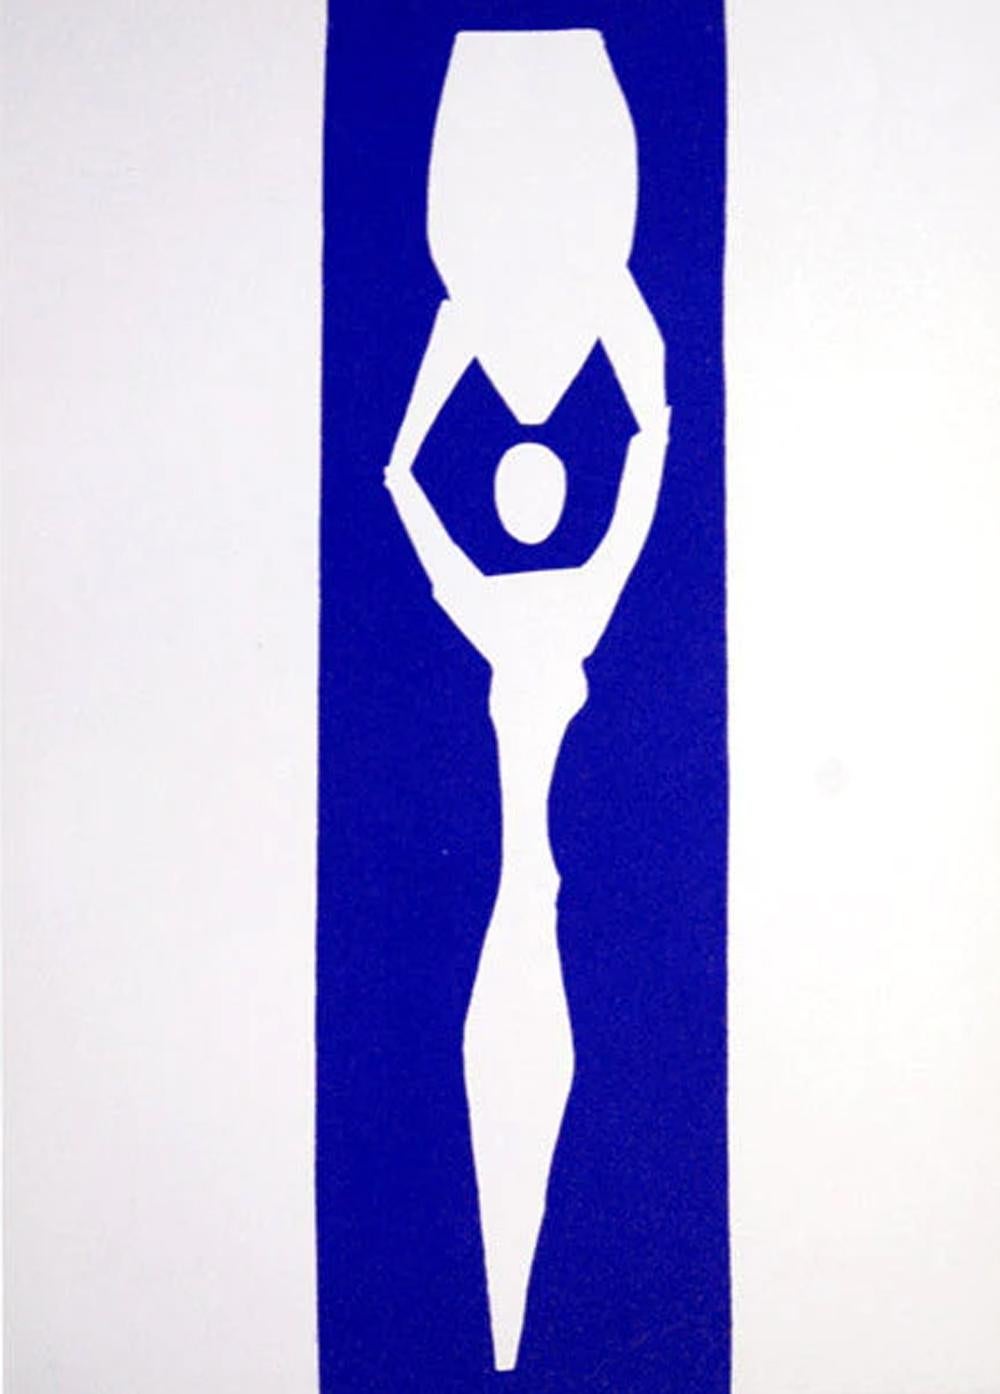 Le Jarre I, from 1958 The Last Works of Henri Matisse